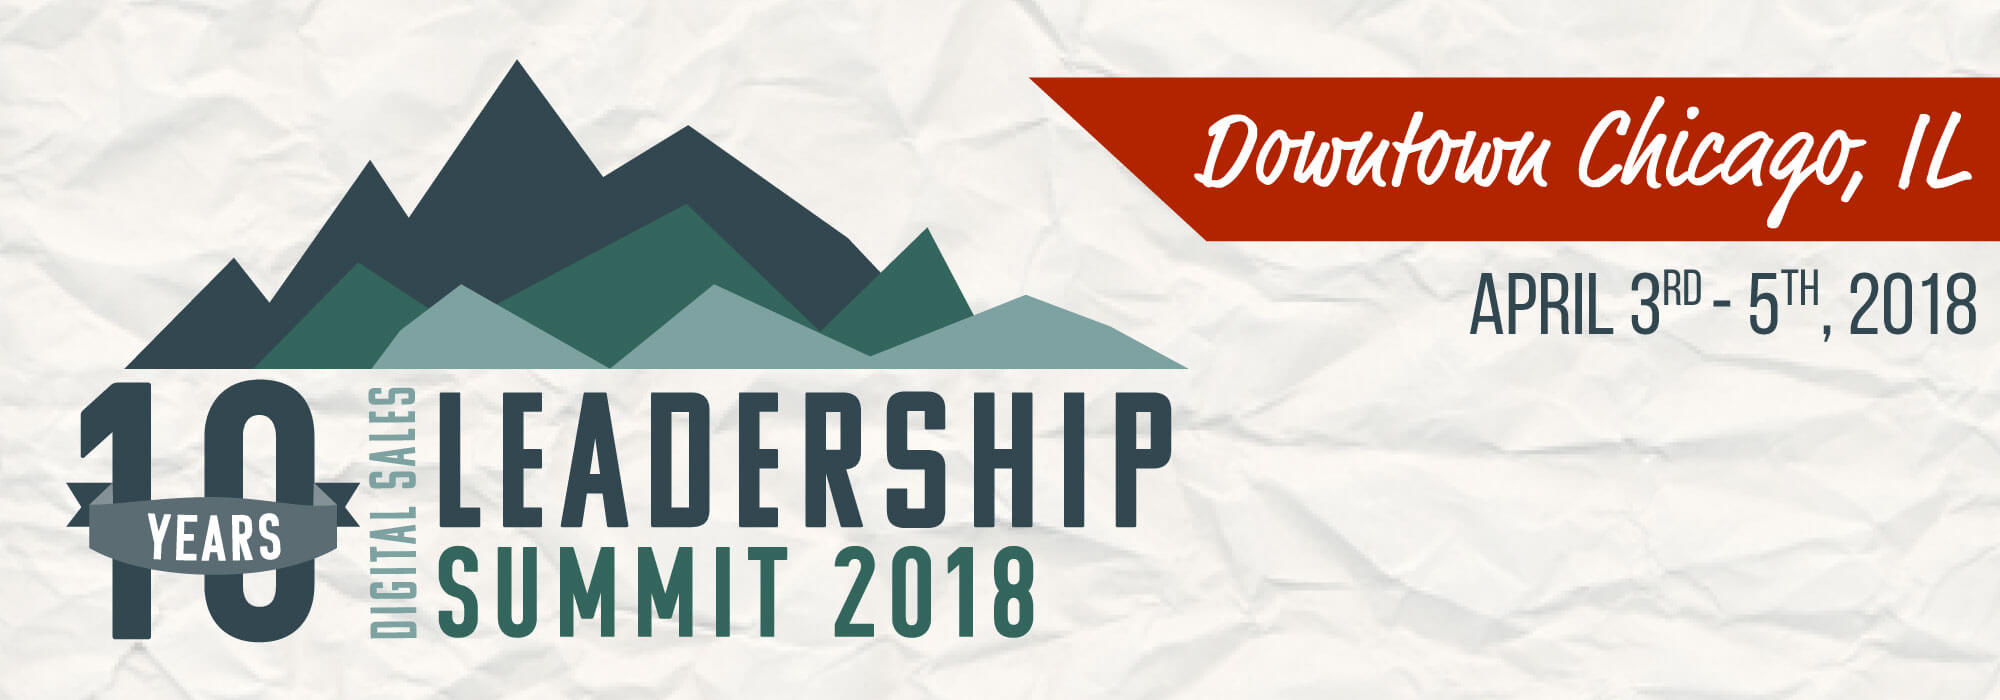 Join Us for the Digital Sales Leadership Summit 2018